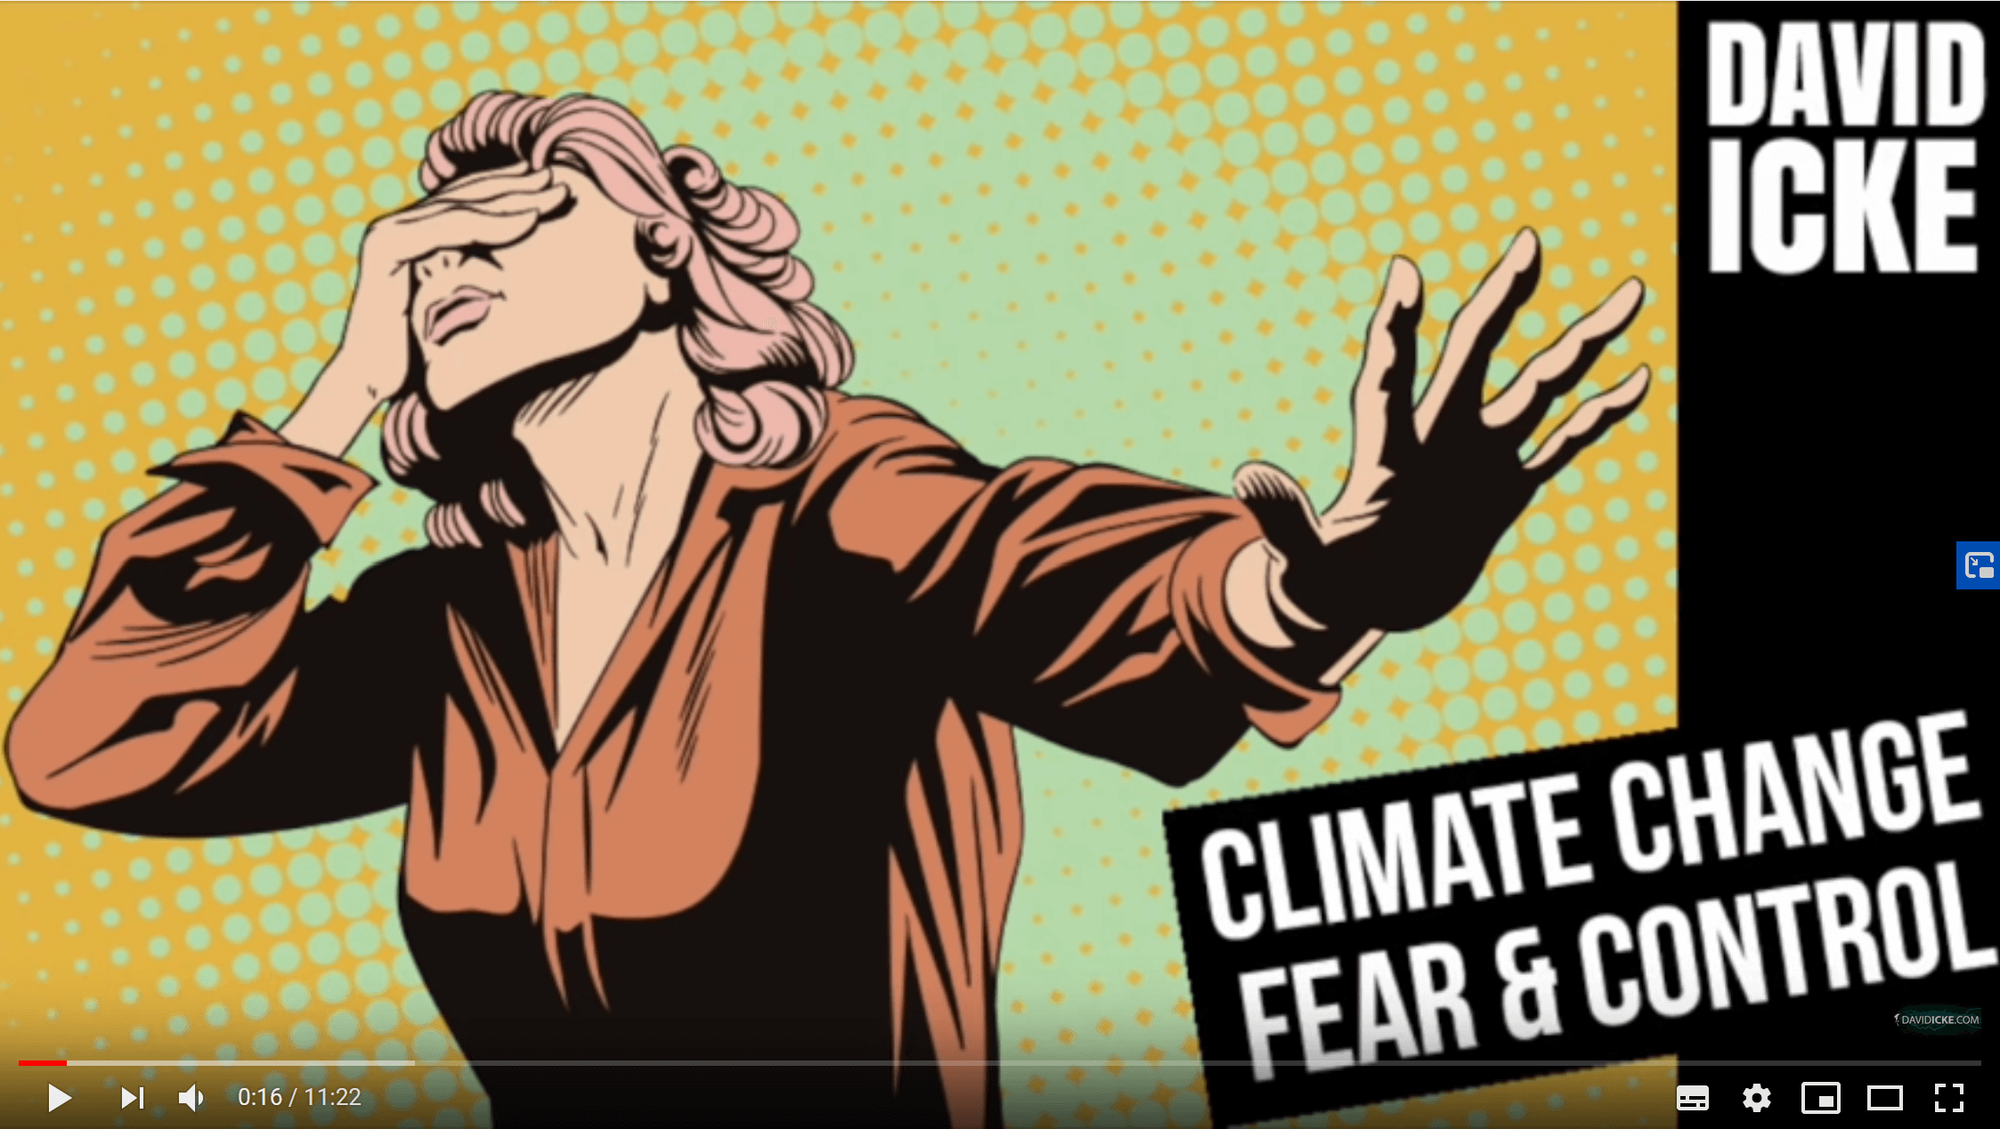 Climate Change—Fear & Control—by David Icke